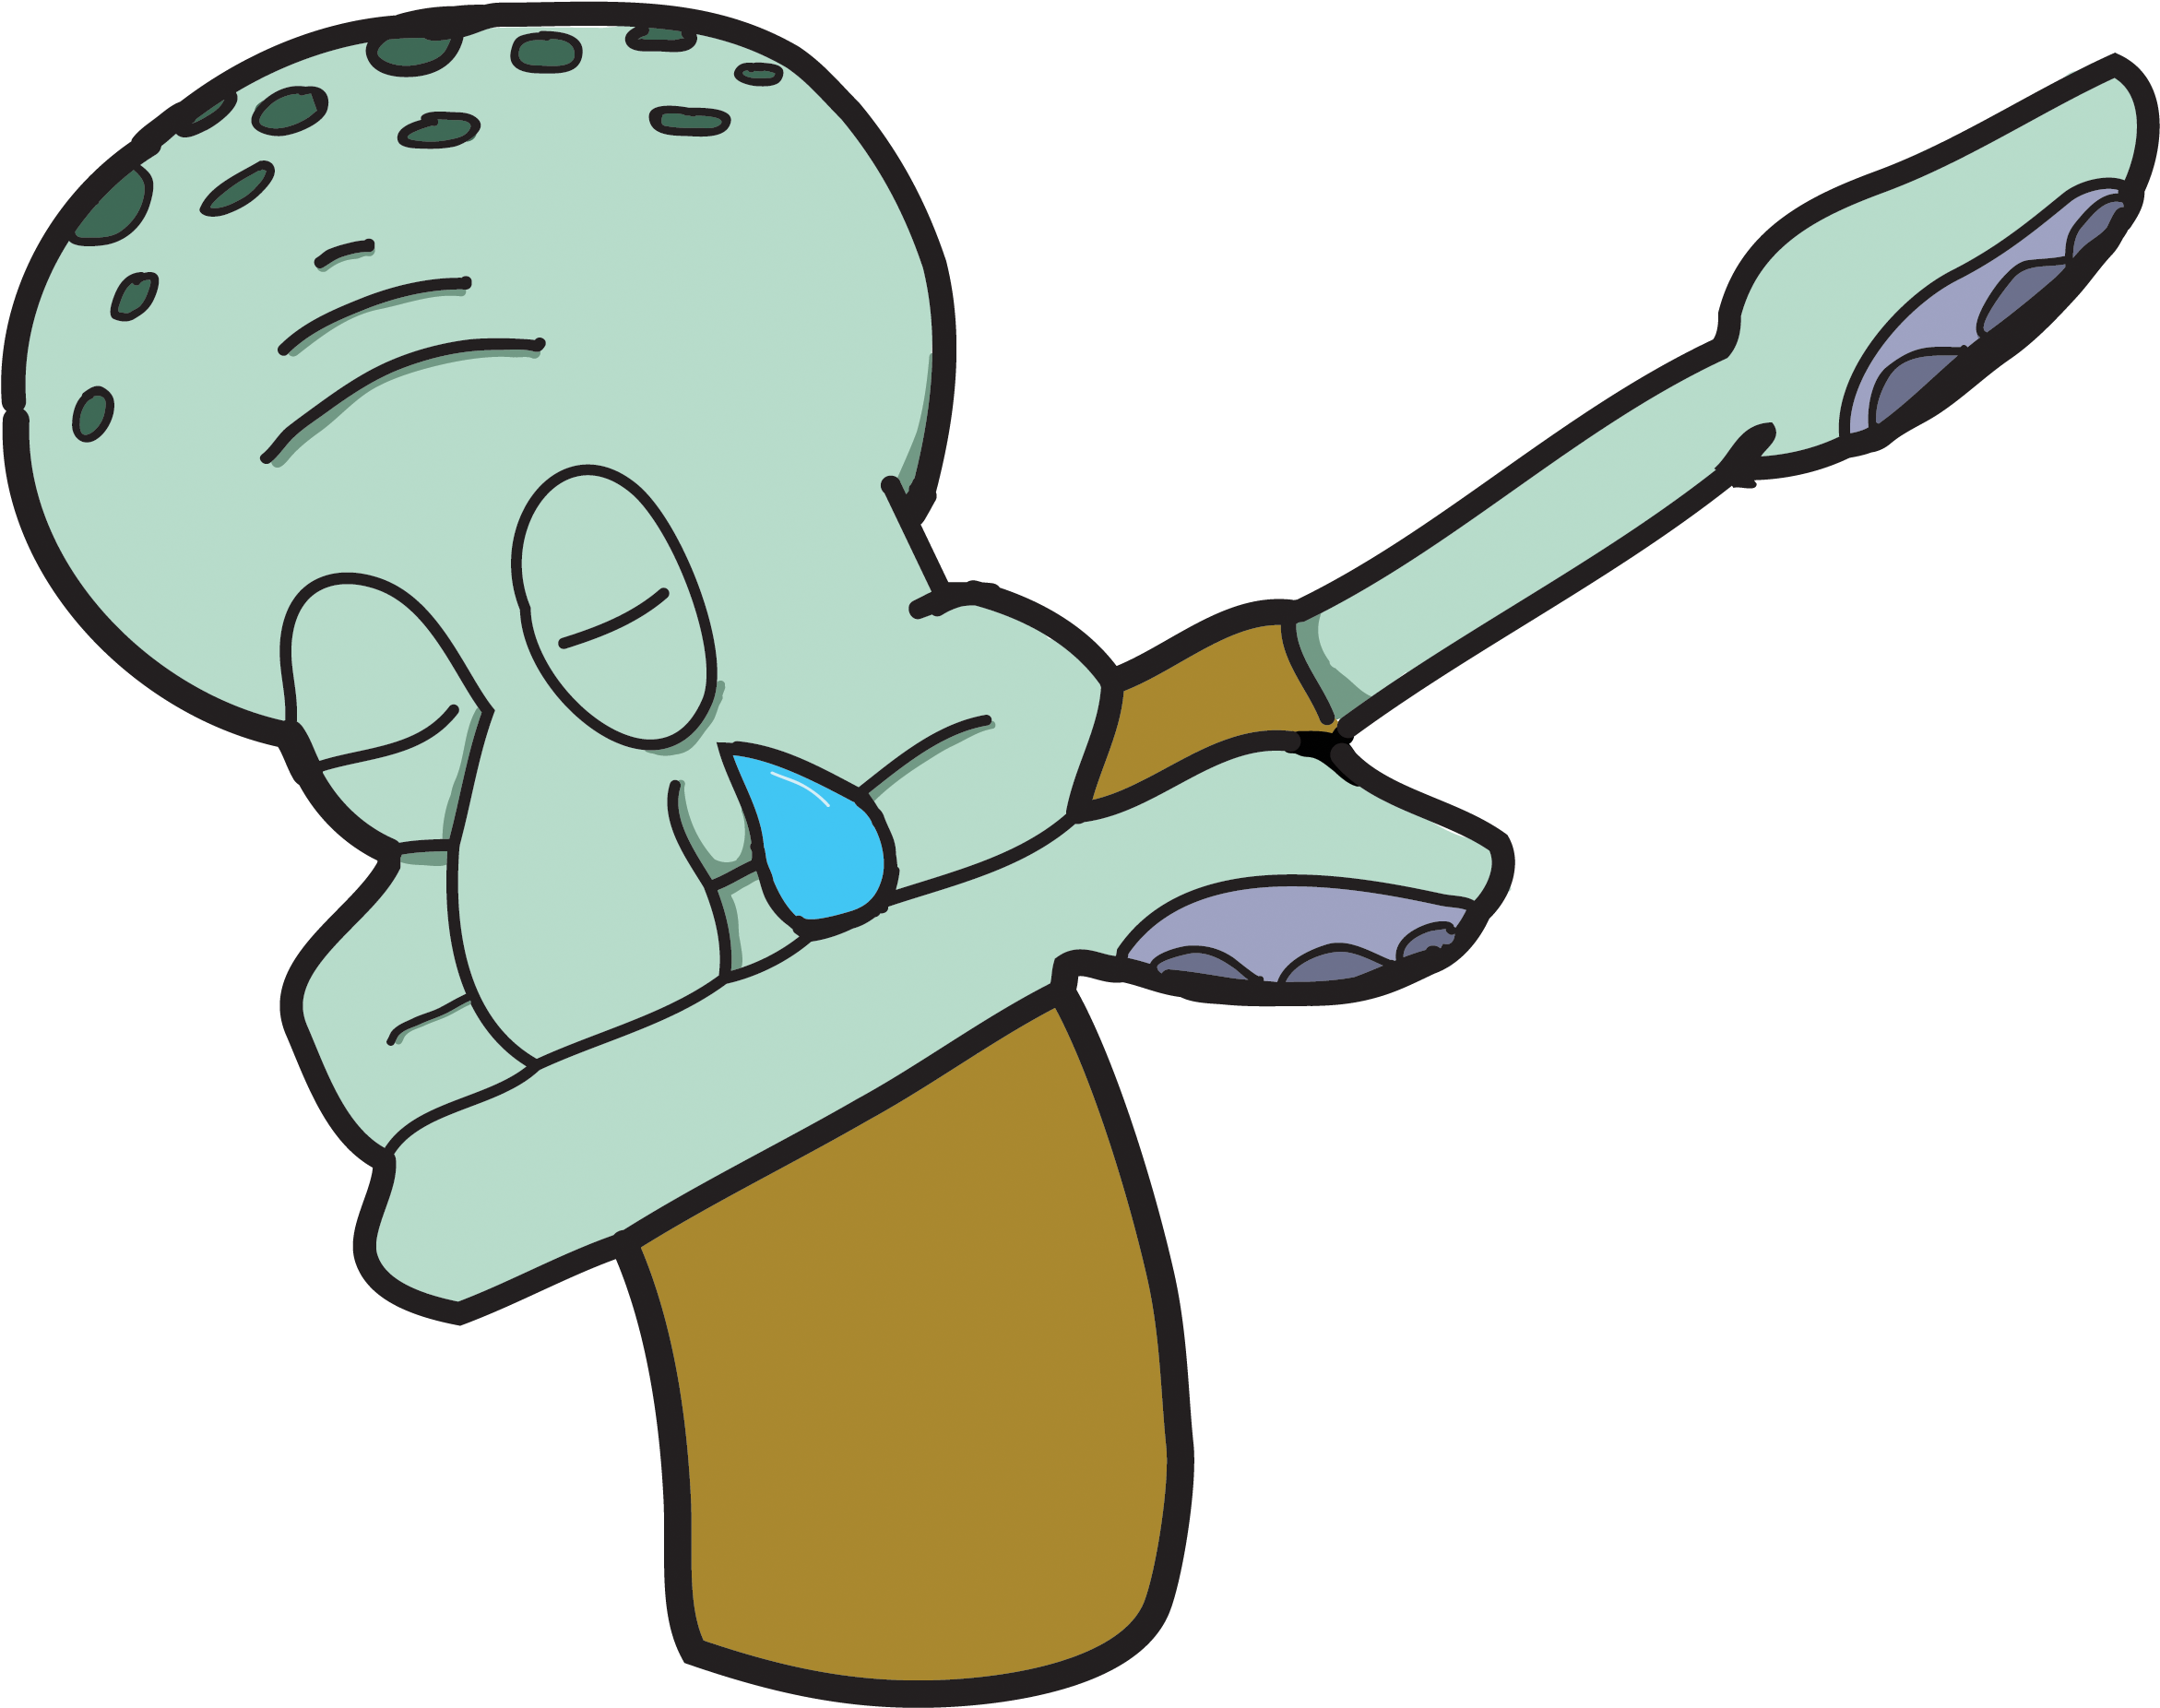 Download and share clipart about Dab Is Dead - Dab, Find more high quality ...